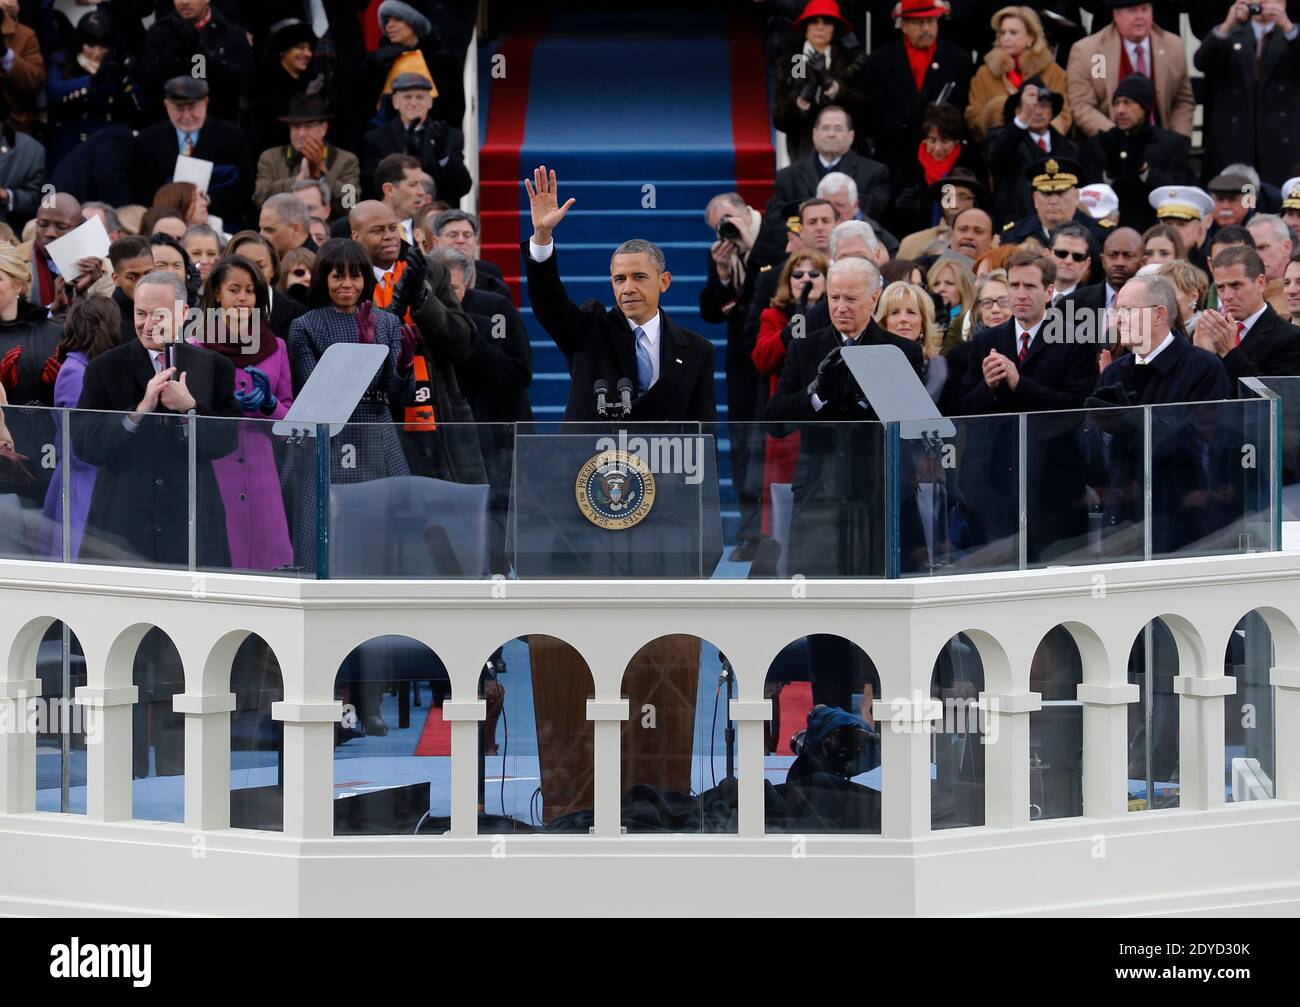 President Barack Obama waves to crowd after his speech at the ceremonial swearing-in at the U.S. Capitol during the 57th Presidential Inauguration in Washington on January 21, 2013. Photo by Scott Andrews/Pool/ABACAPRESS.COM Stock Photo